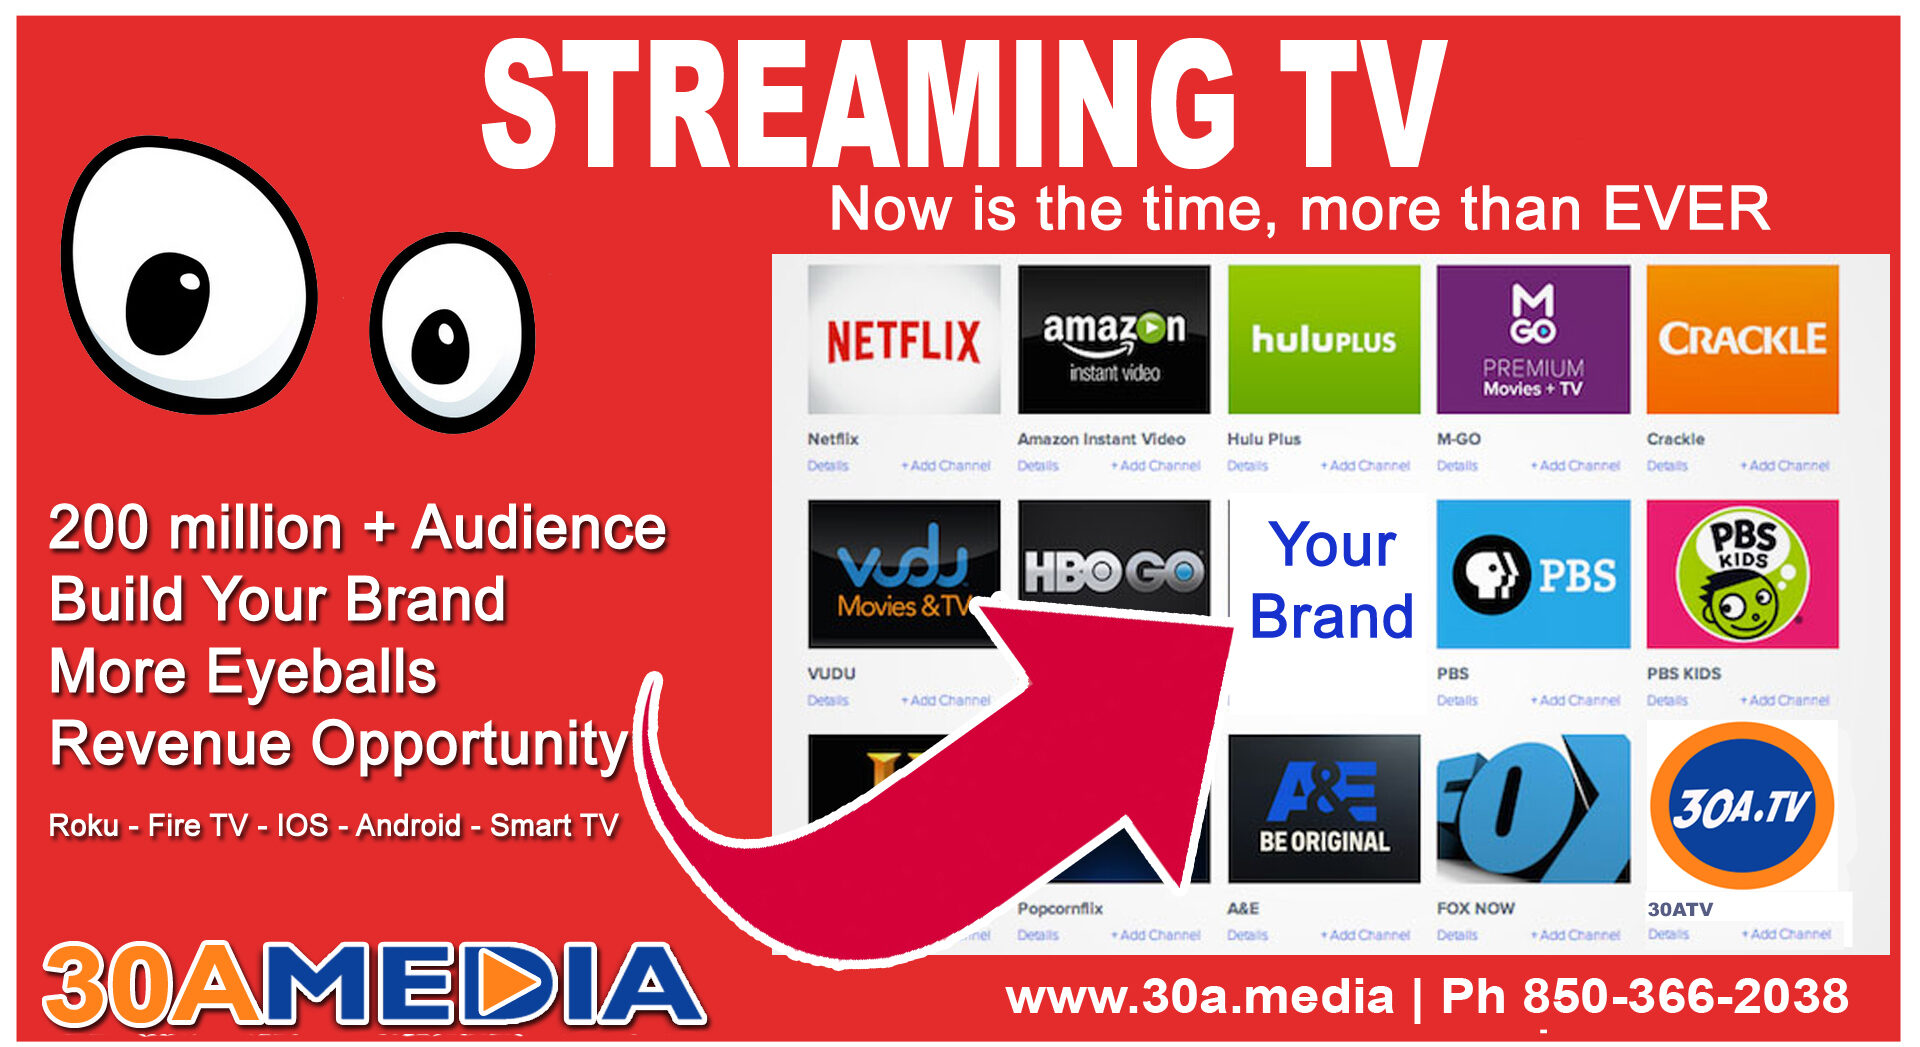 Streaming TV is at Your Fingertips Launch today !